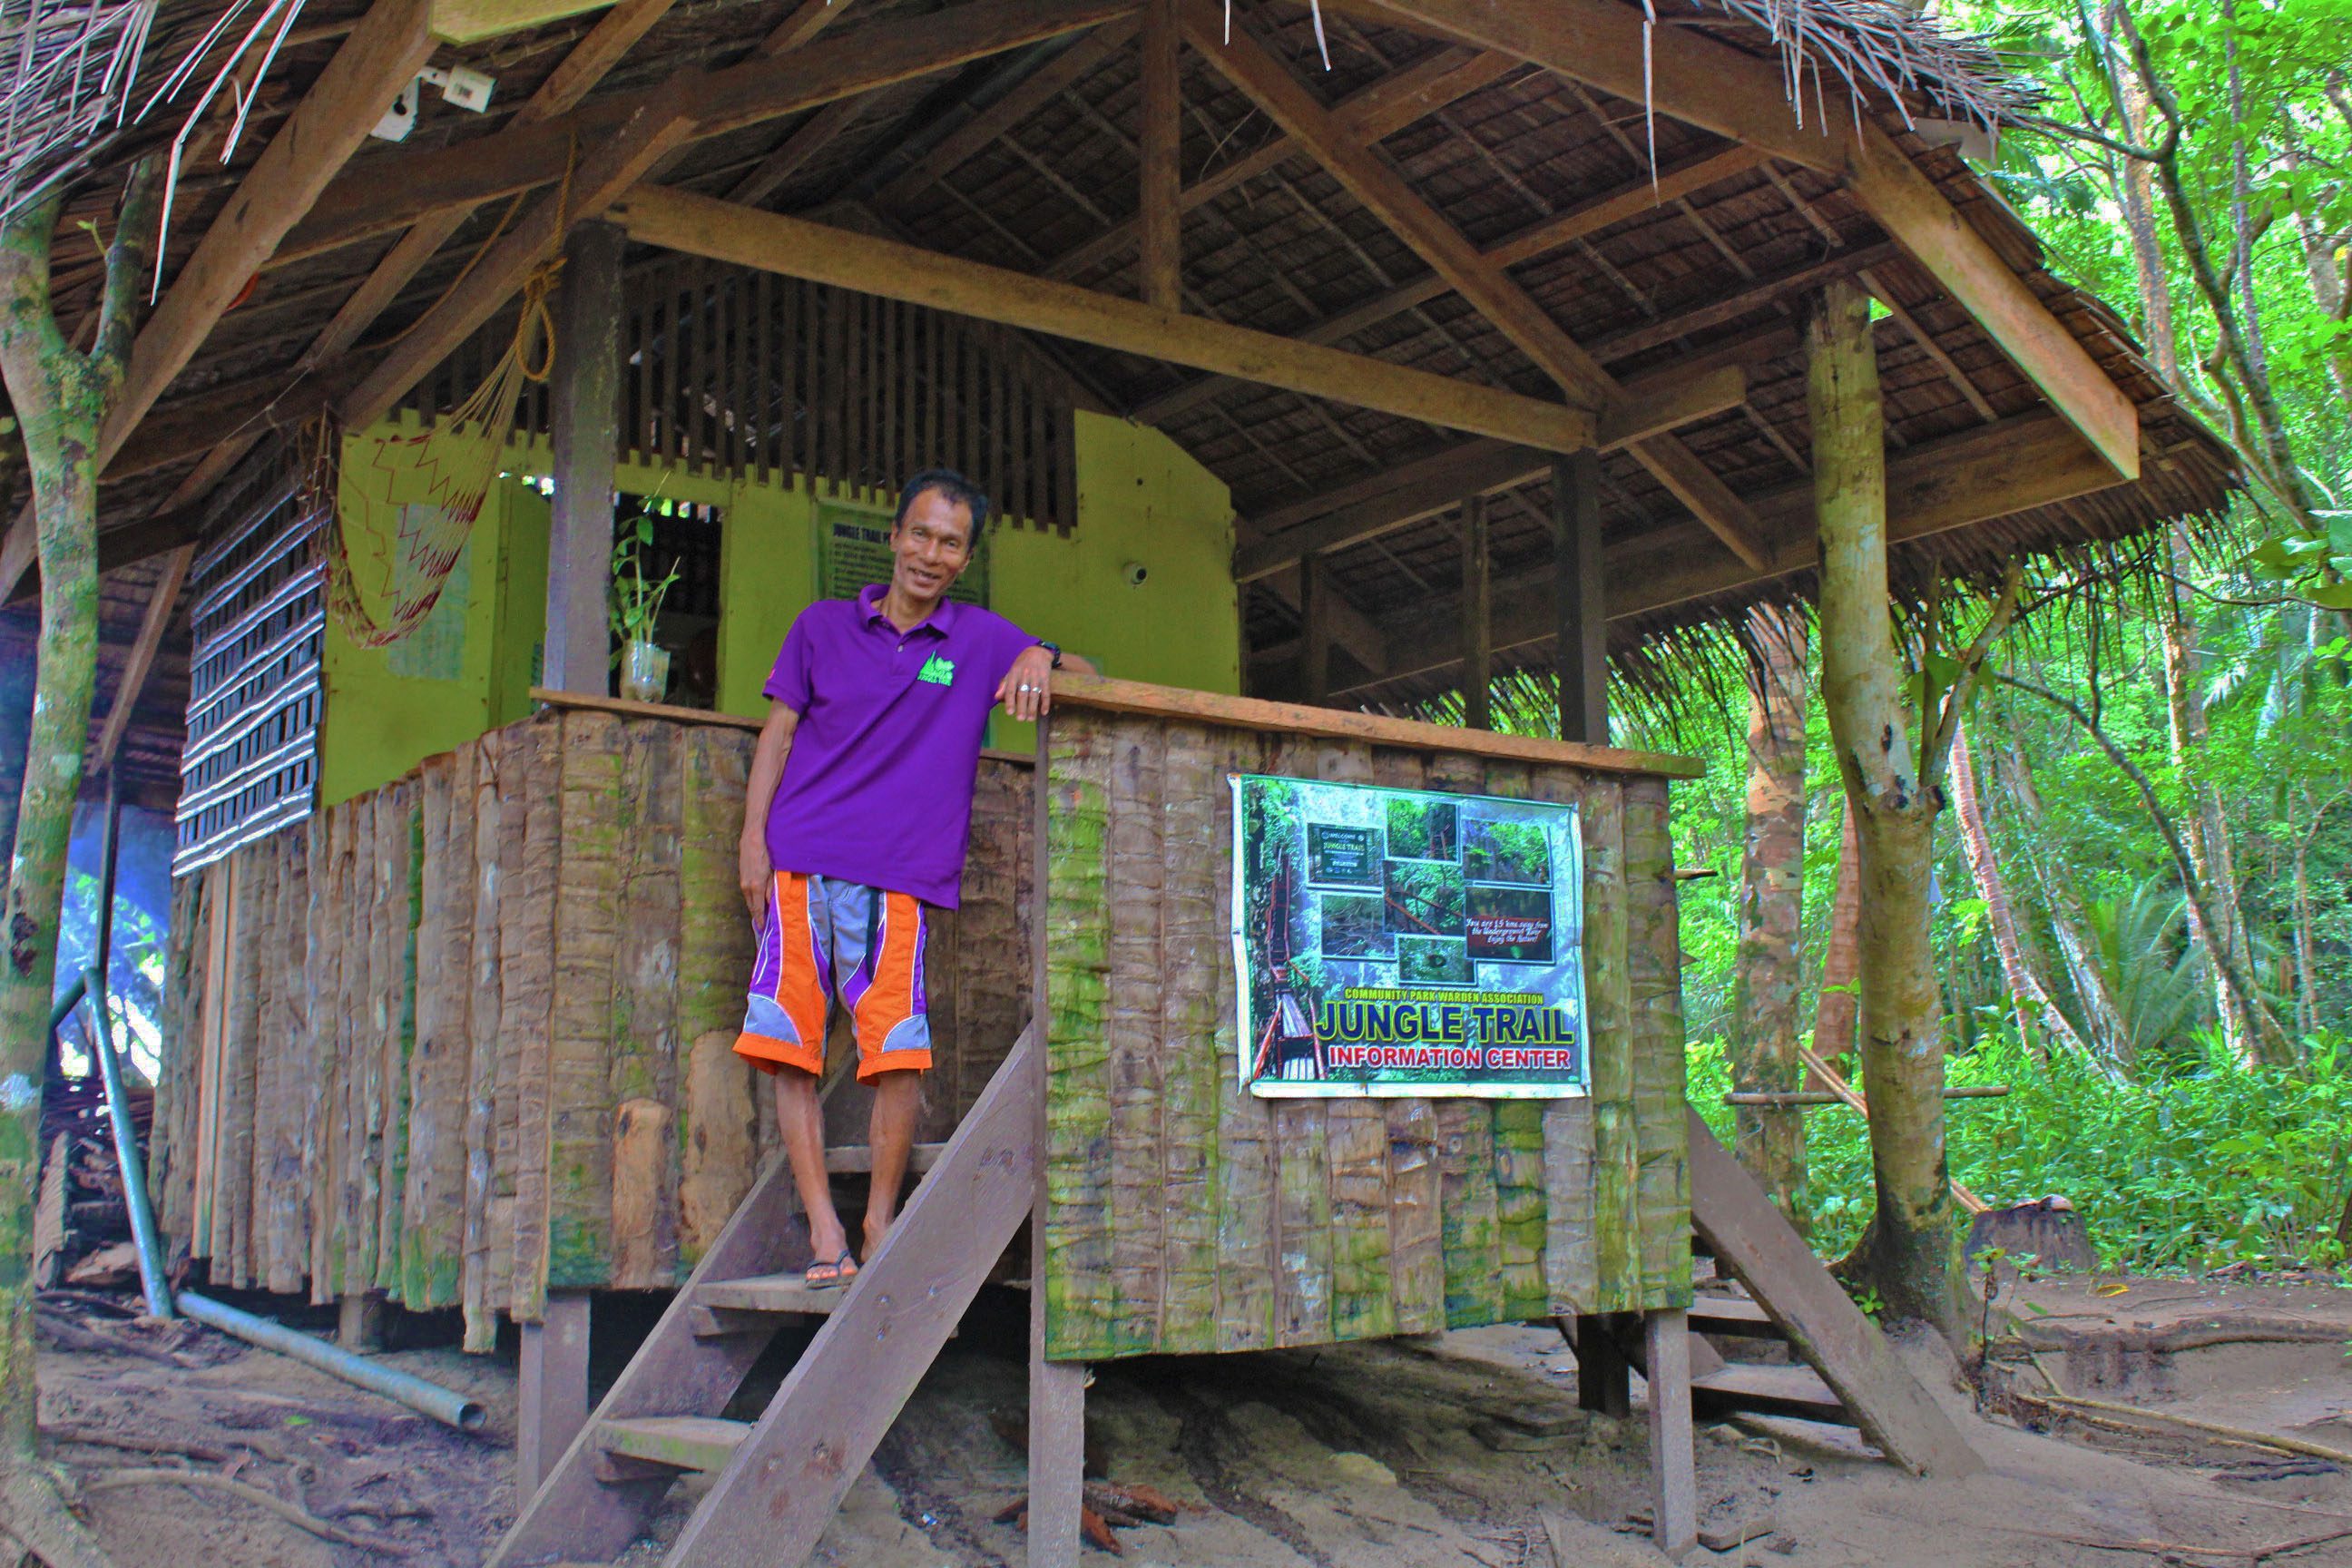 INFORMATION CENTER. A Tagbanua community park warden greets visitors with a smile as they pass by the Jungle Trailâs information center at trailhead. Photo by Keith Anthony Fabro 